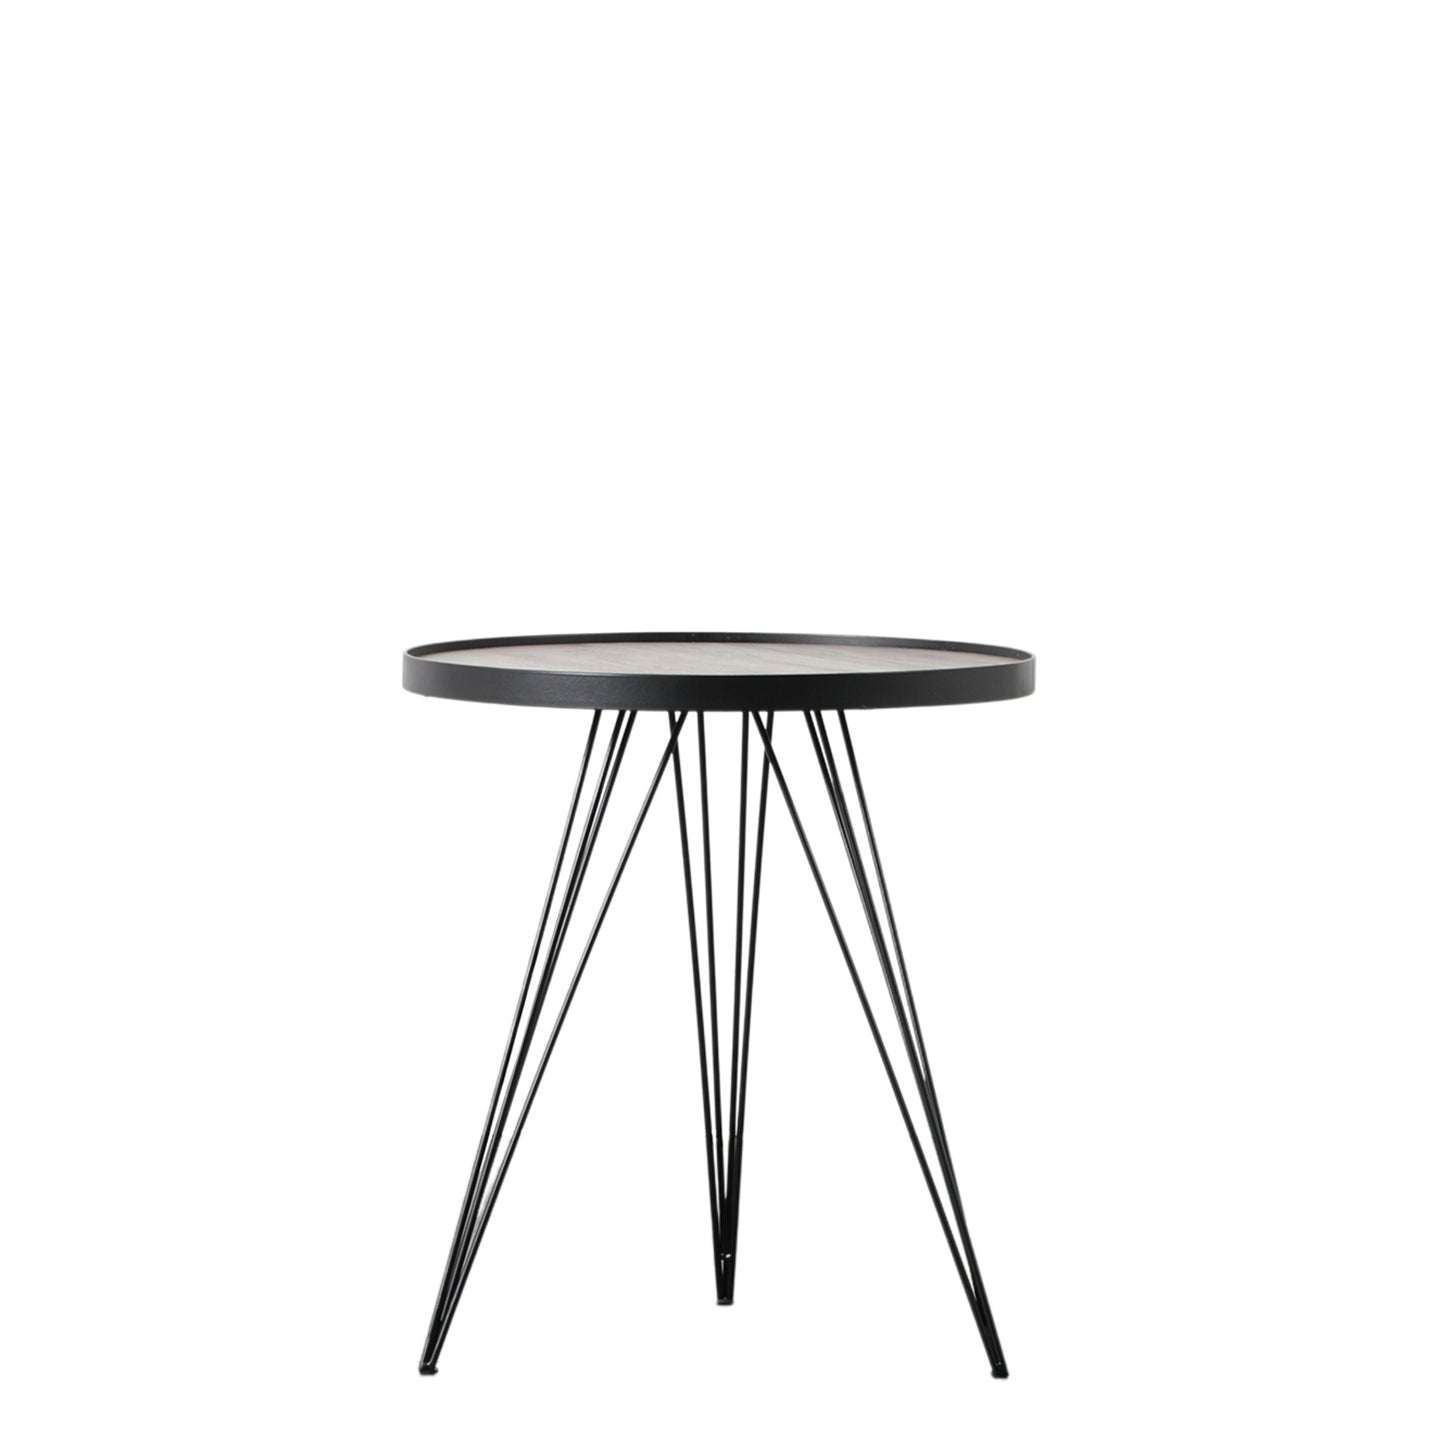 A Tufnell Side Table 500x500x560mm, perfect for interior decor, with metal legs and a glass top from Kikiathome.co.uk.